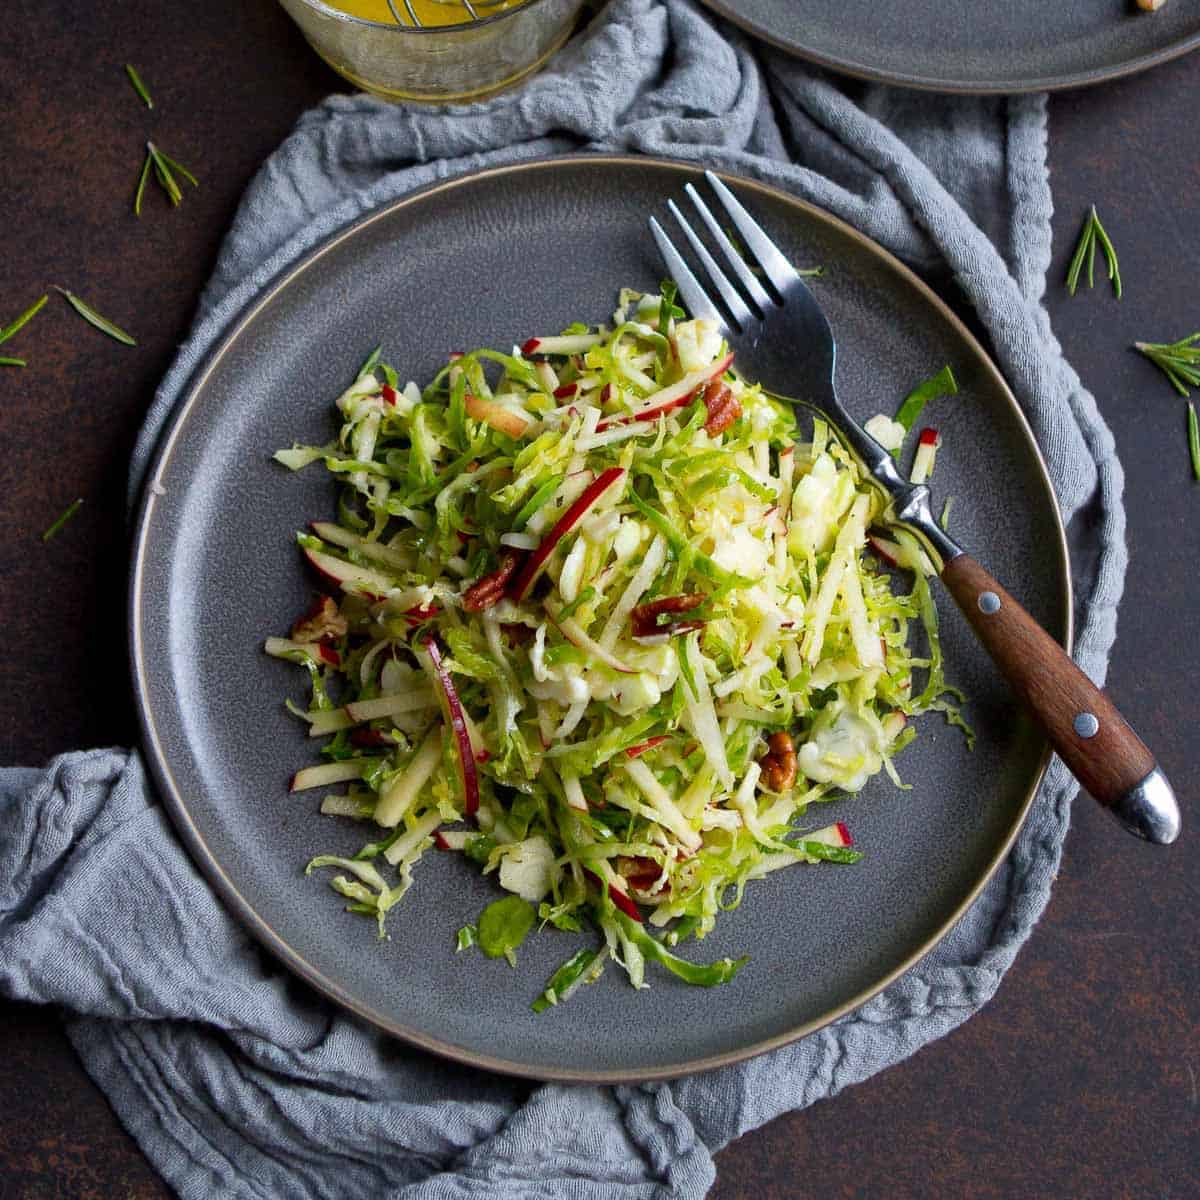 Apple and shredded Brussels sprouts slaw on gray plates, with gray napkin.